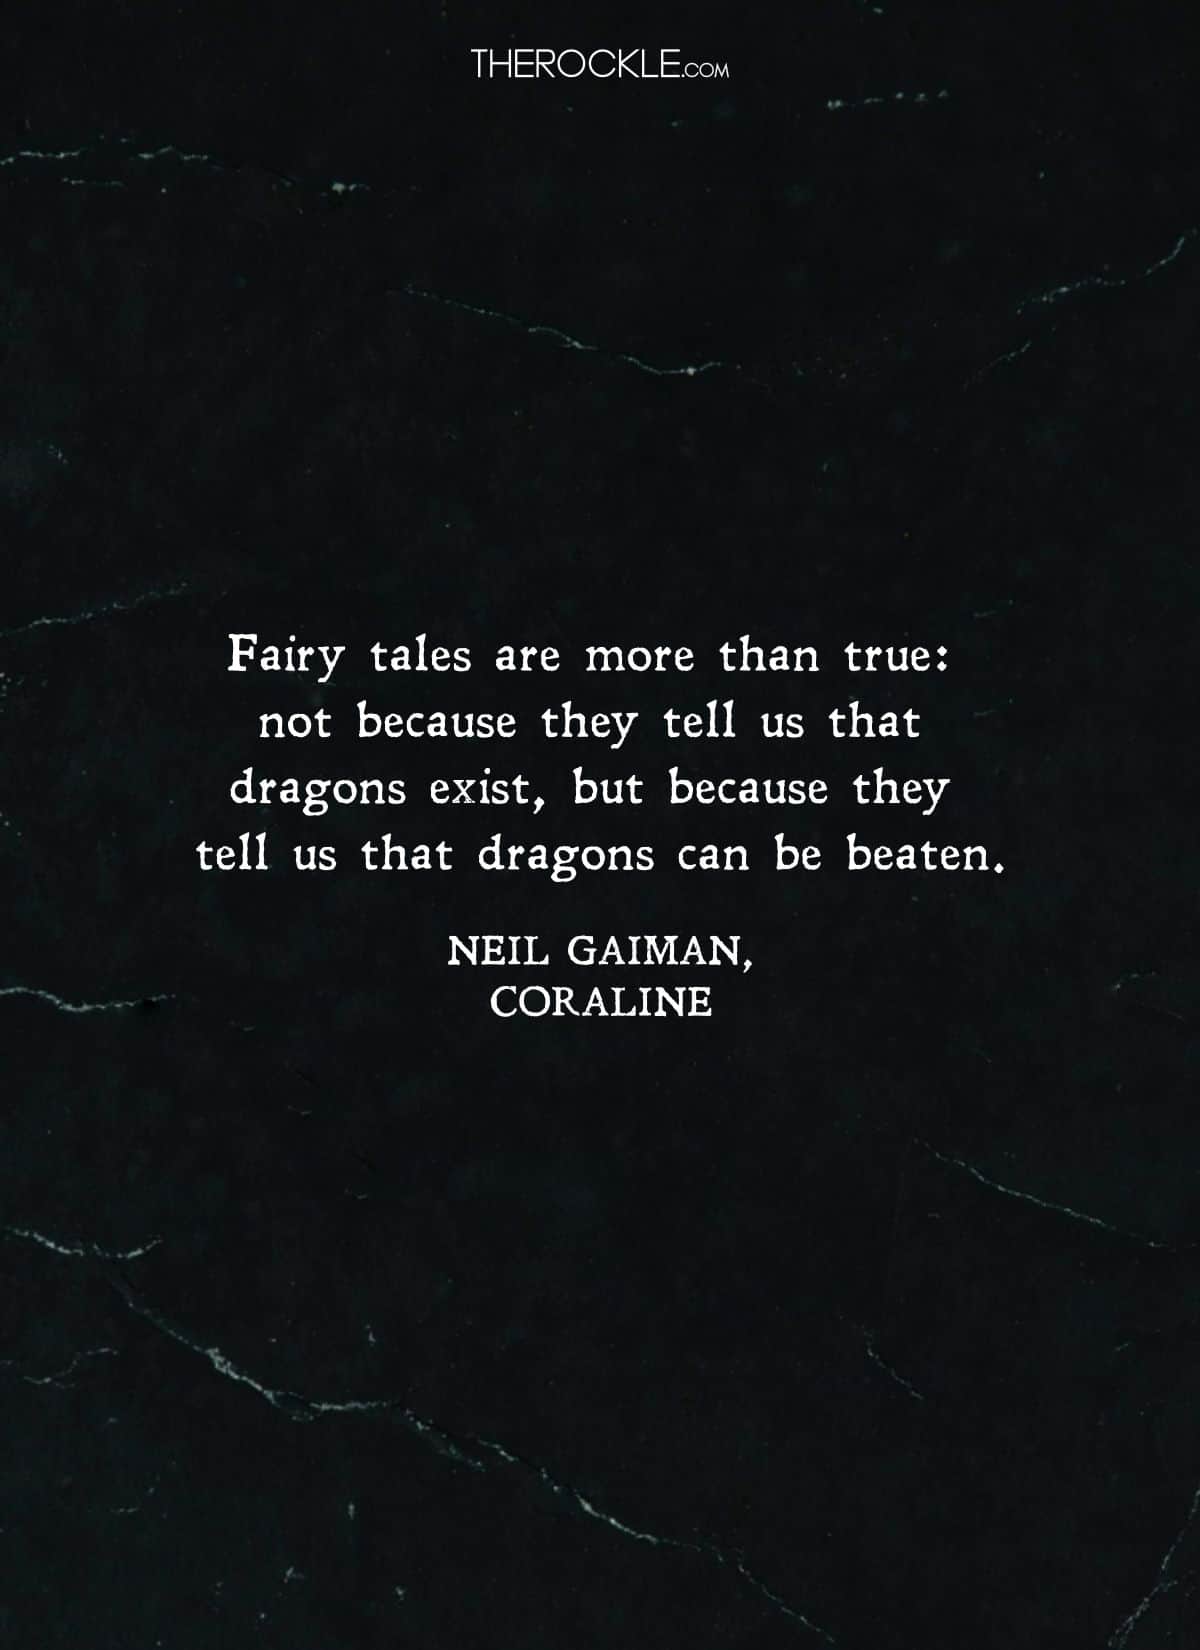 Quote about fairy tales from the book Coraline